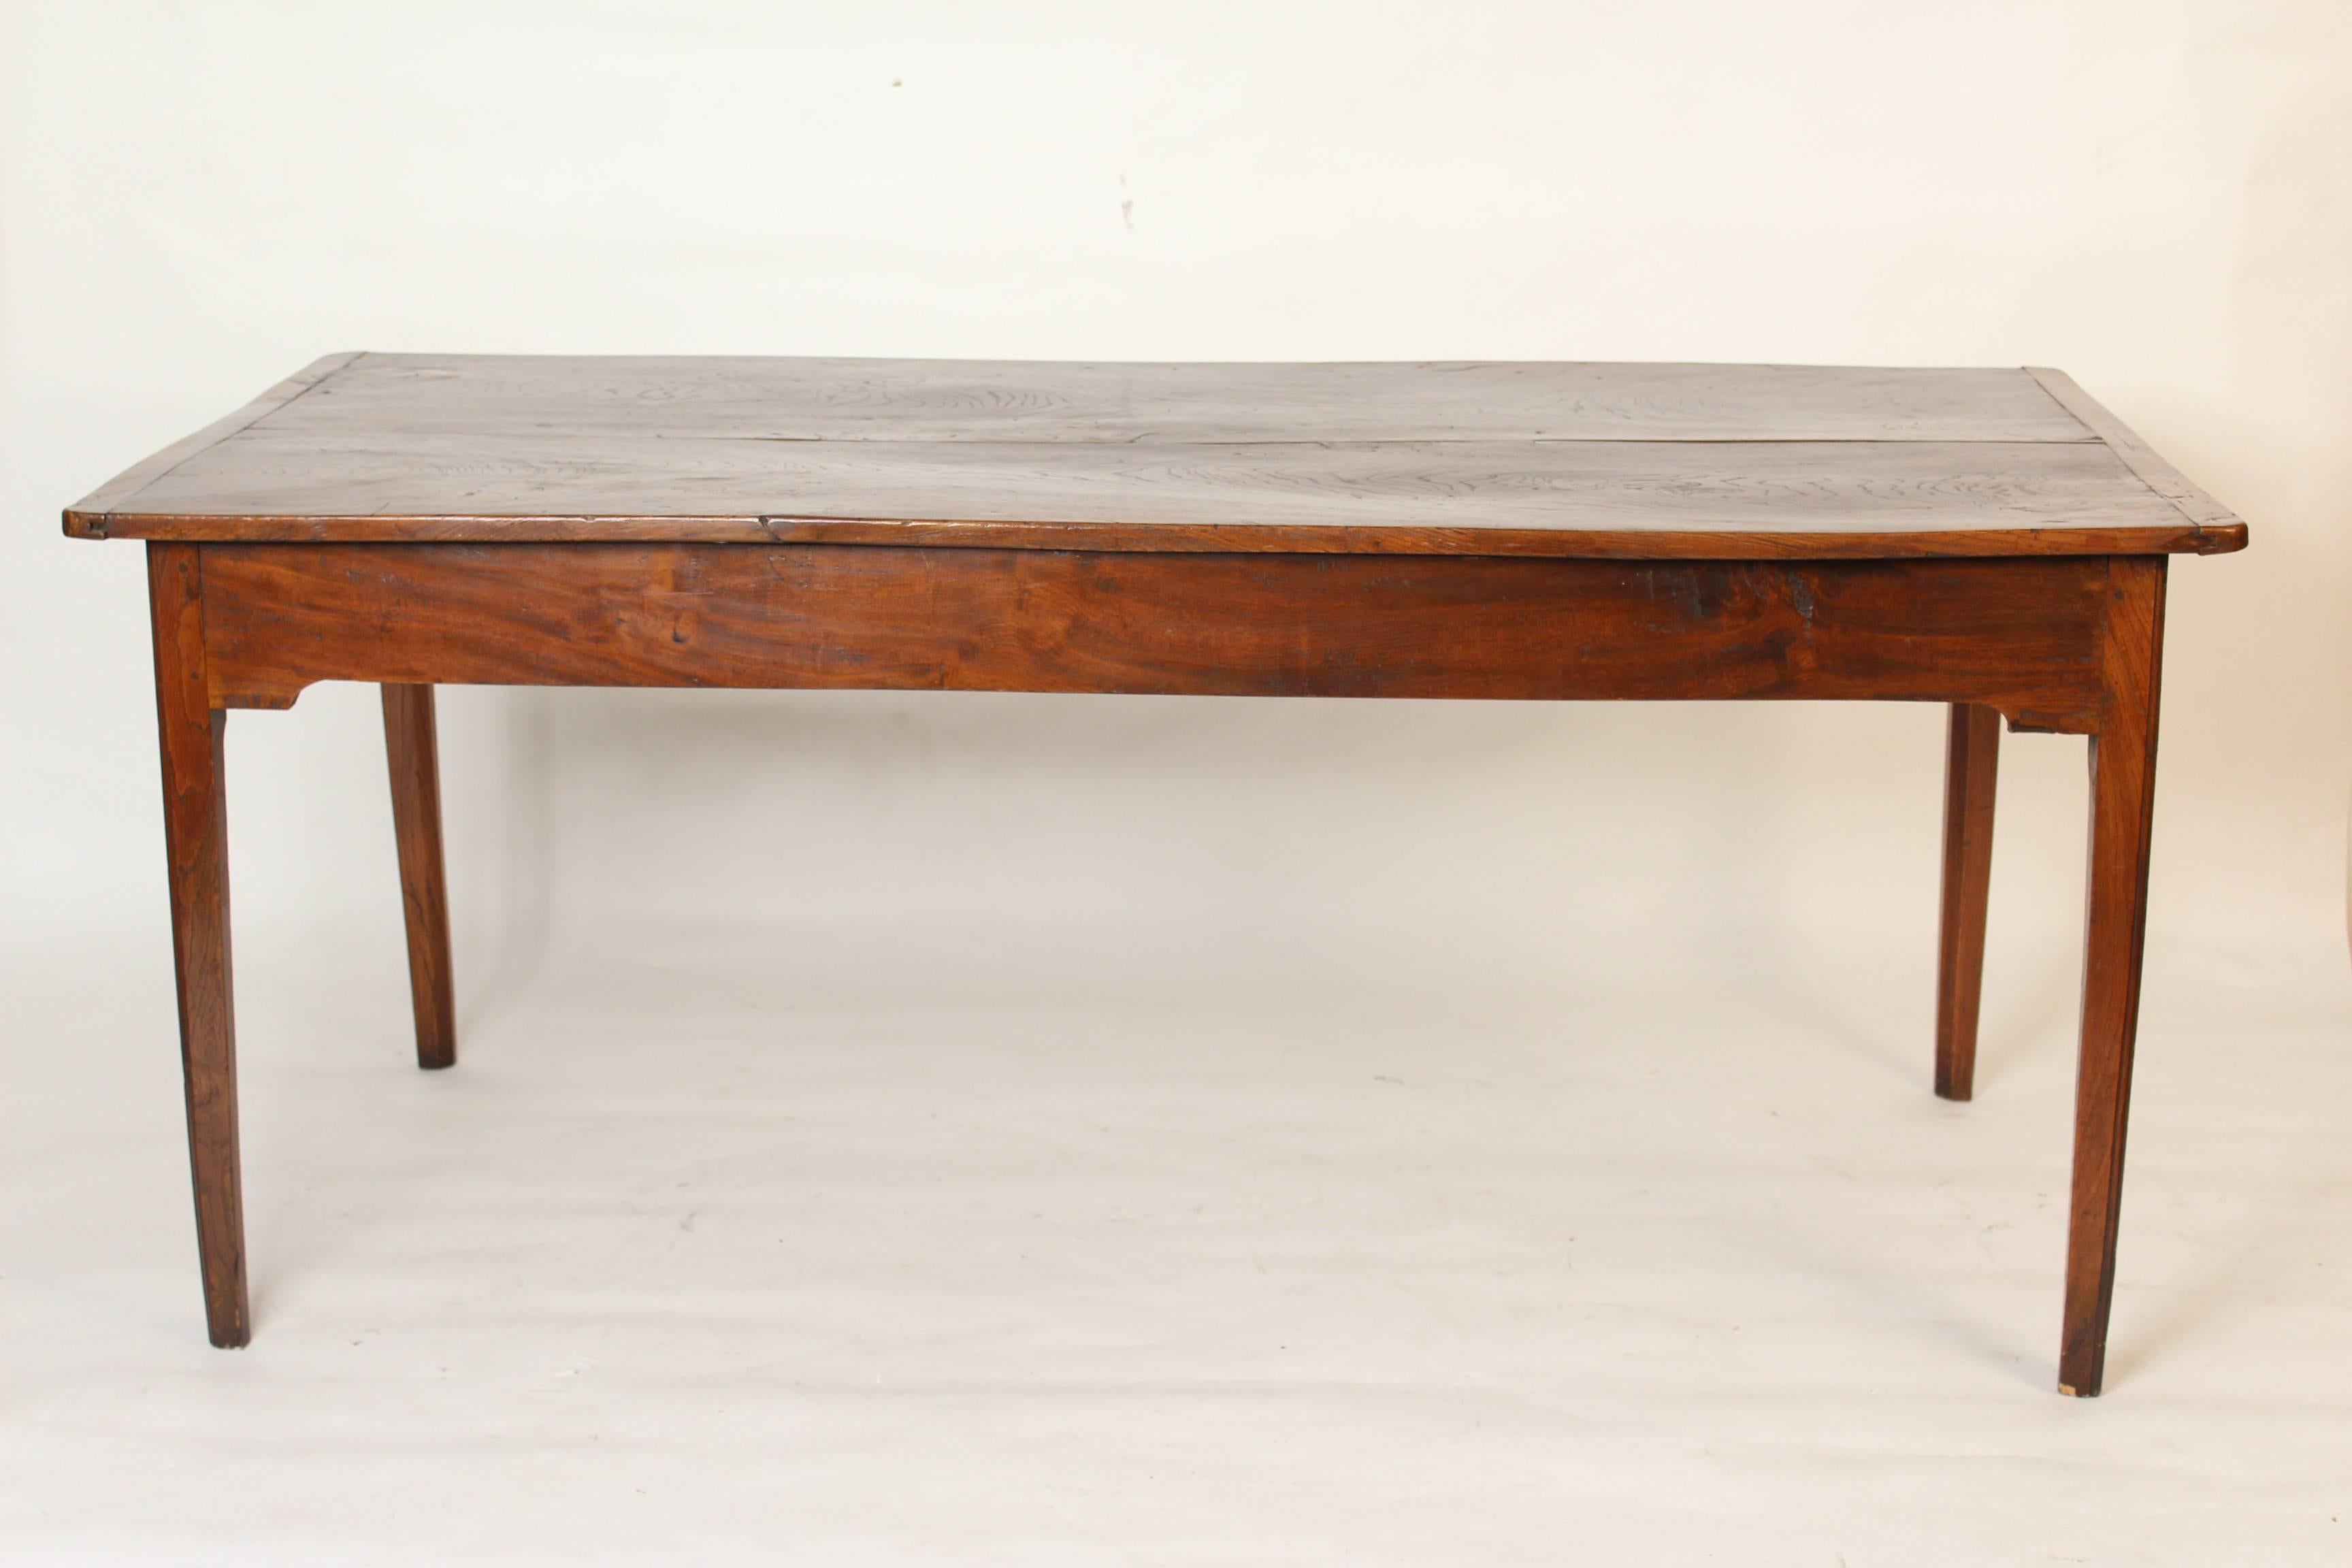 English or French elmwood farm table, 19th century. The wood on this table has good grain and color.